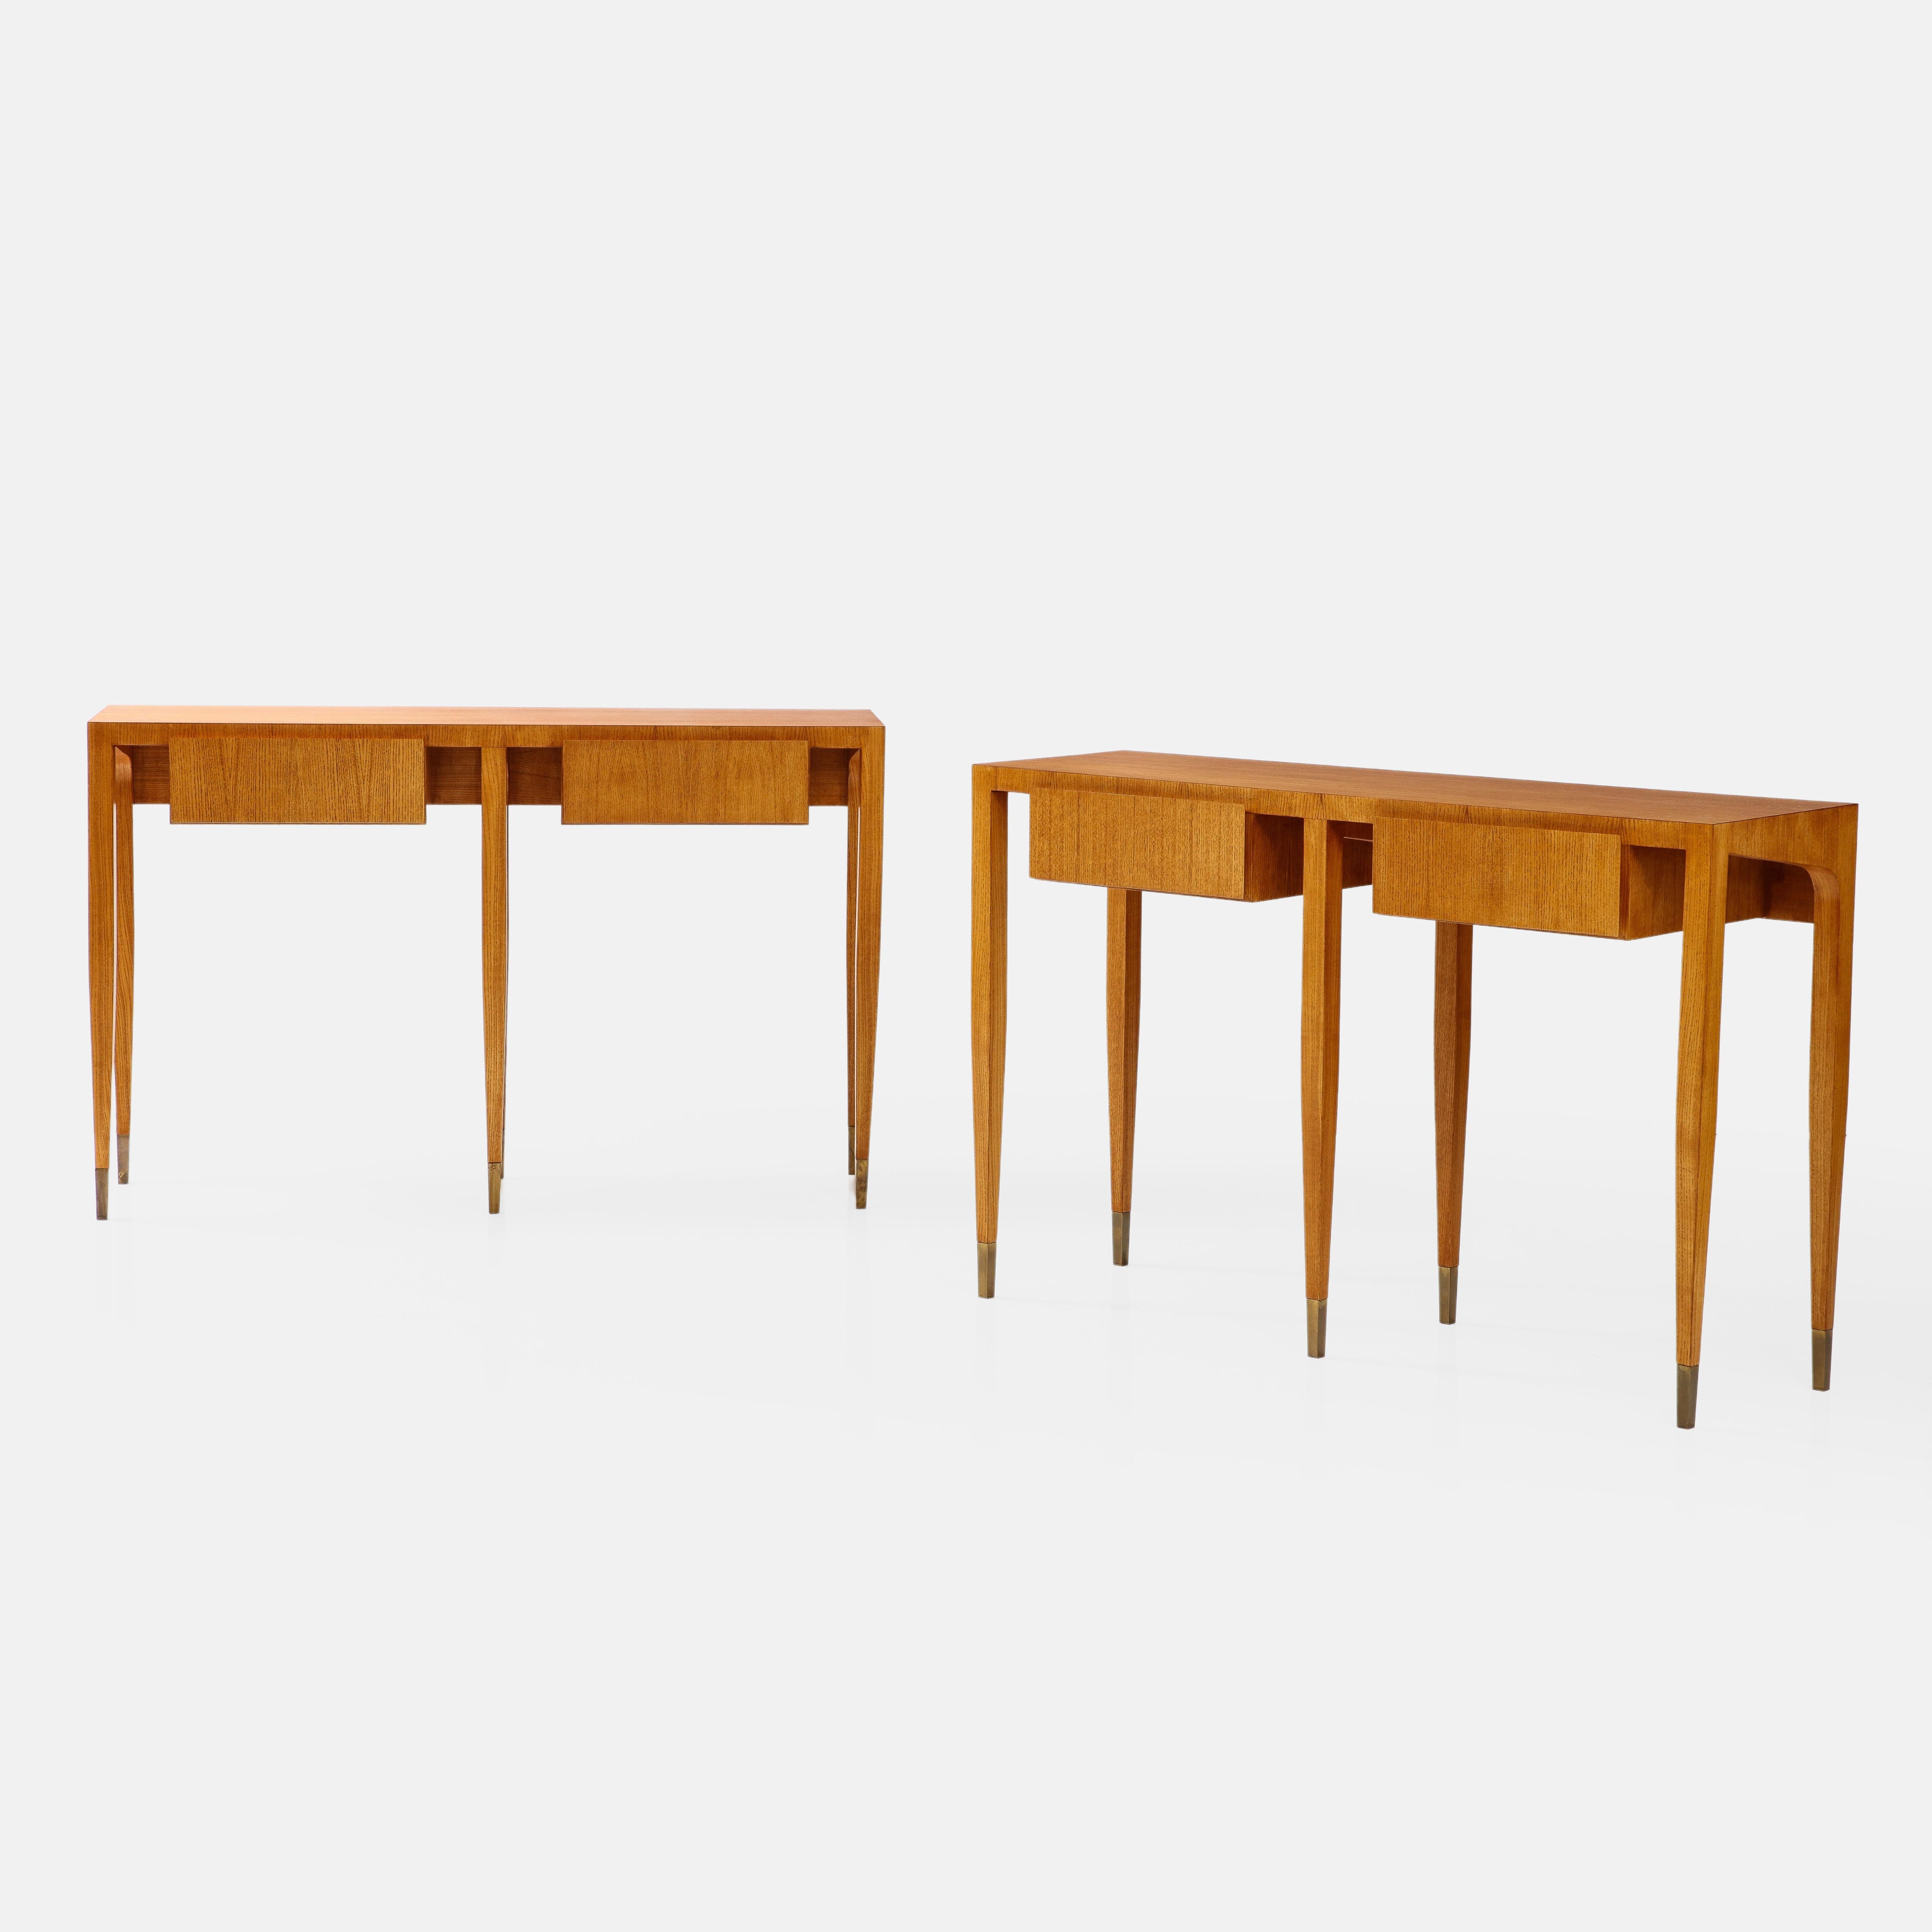 Gio Ponti for Giordano Chiesa rare and important pair of ash wood console tables each with two drawers and six legs ending in brass sabots, Italy, circa 1955.  These exquisite sculptural consoles have fine details throughout and clean architectural